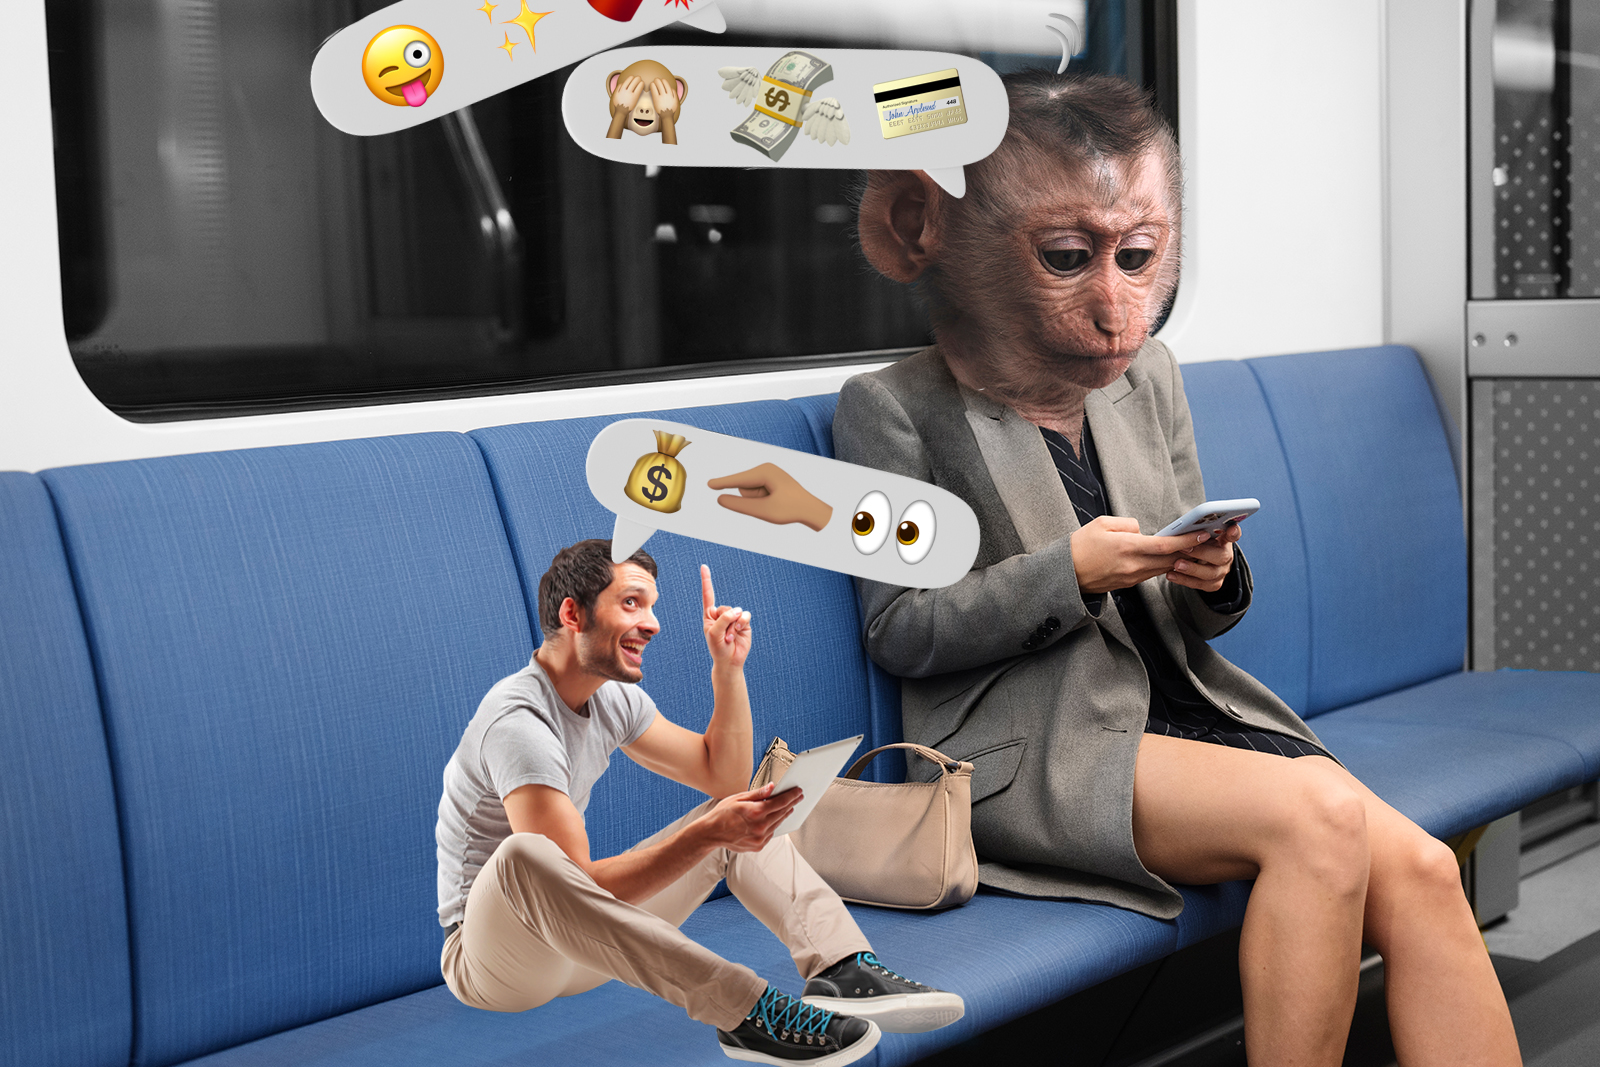 Person with monkey head and a small man are sitting in a bus, giving financial advice through emojis.